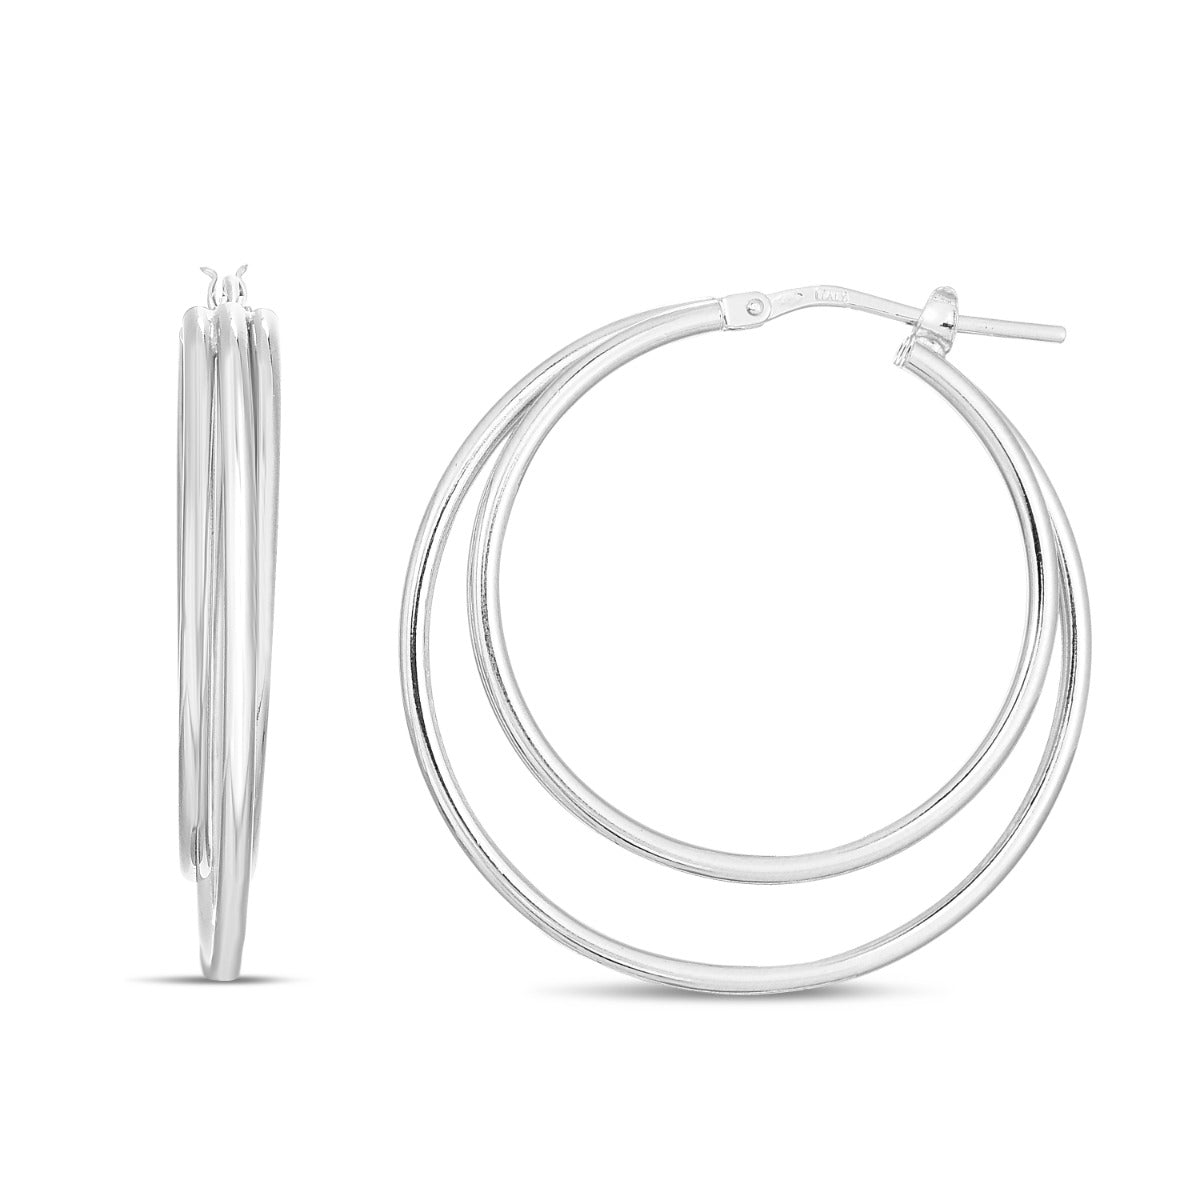 Sterling Silver Polished Triple Row Hoops with Hinged closure.